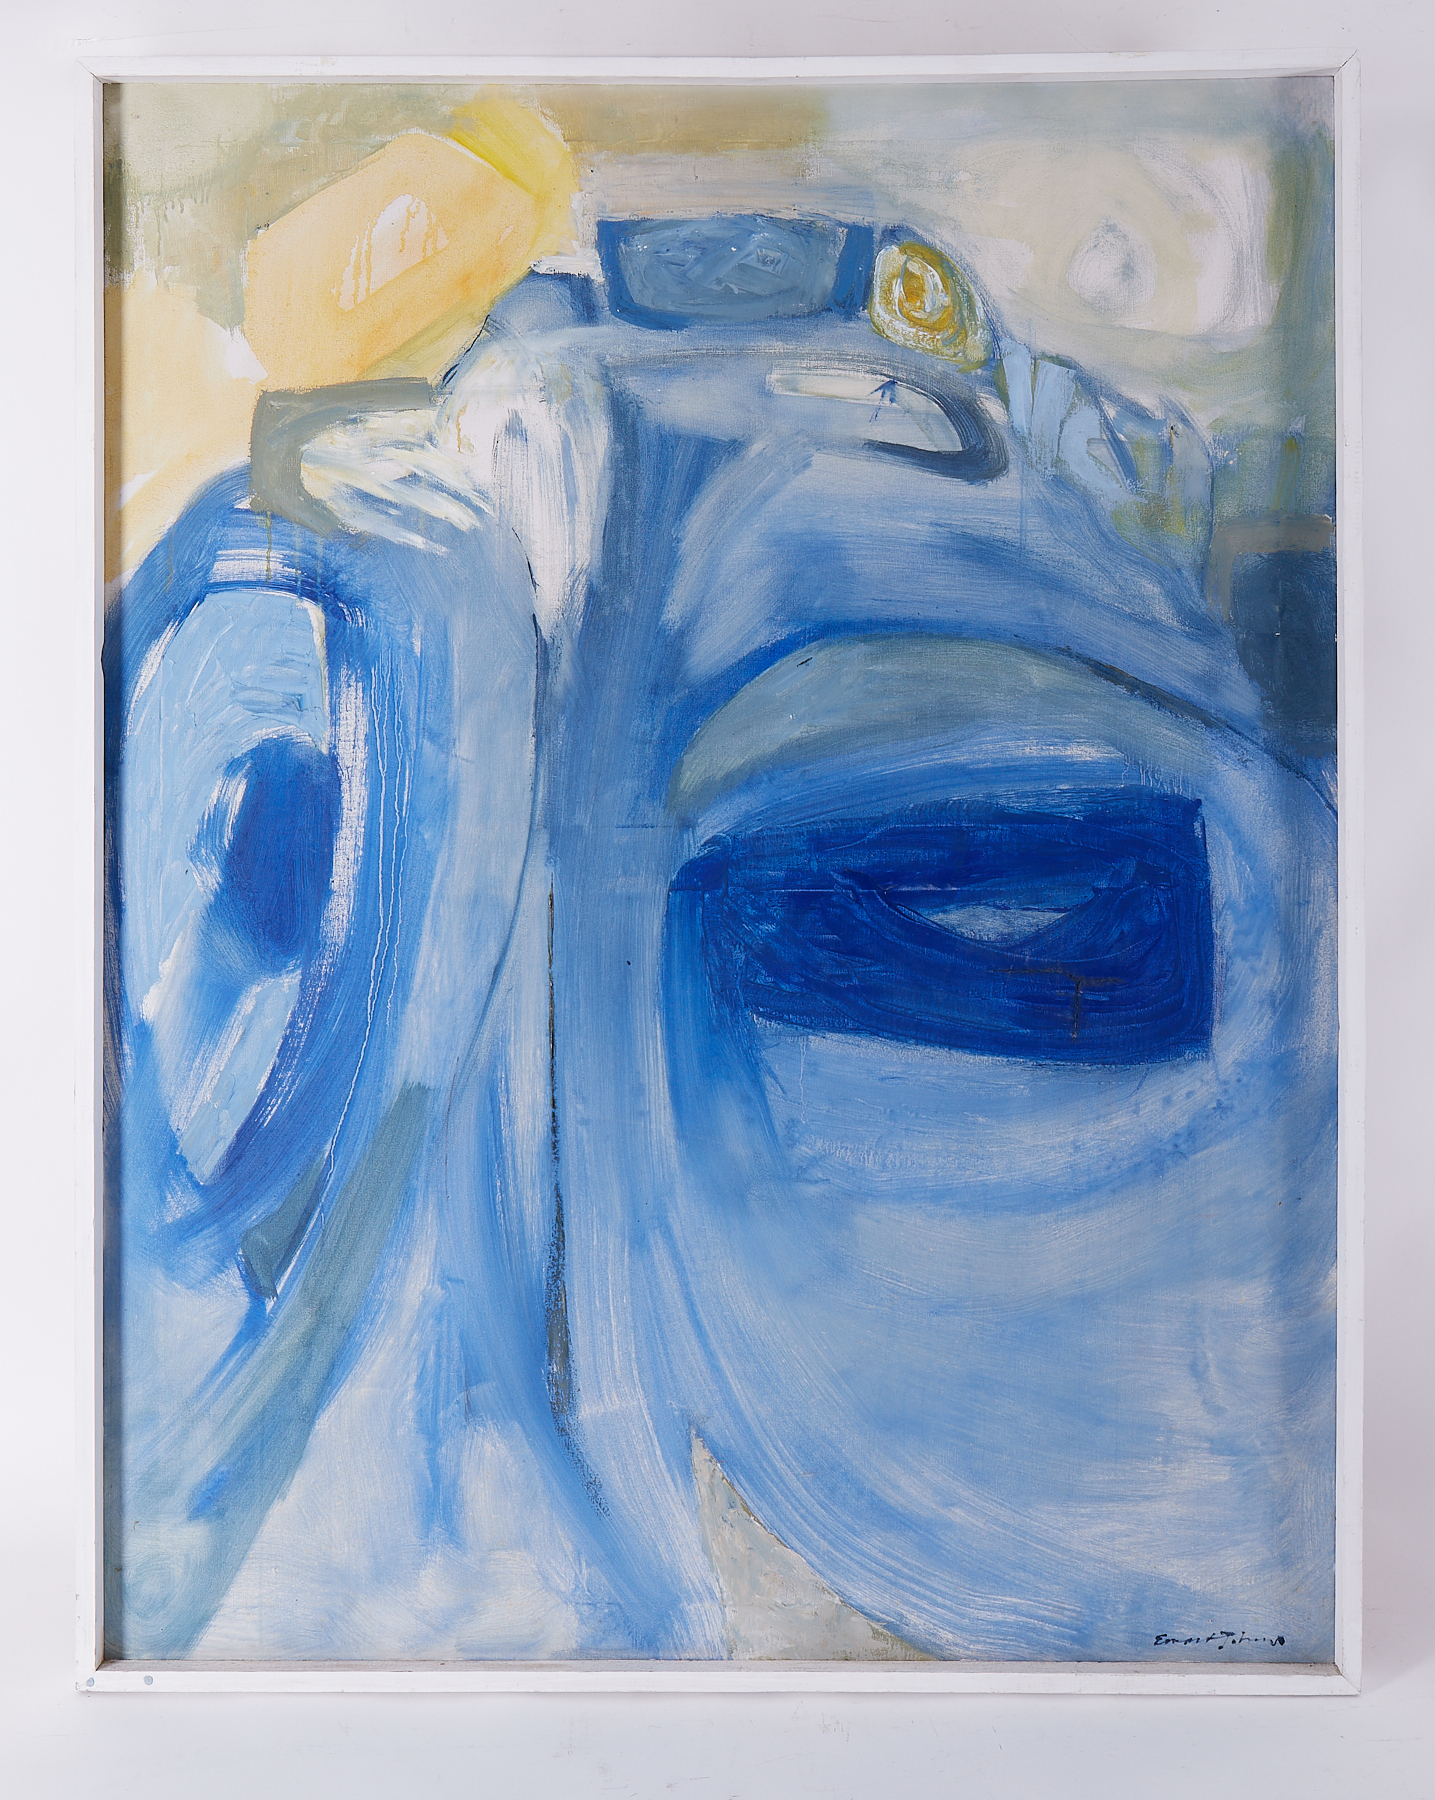 Framed painting titled ' Upright Figurescape' c.1962/3, oil on canvas, 129cm x 101cm